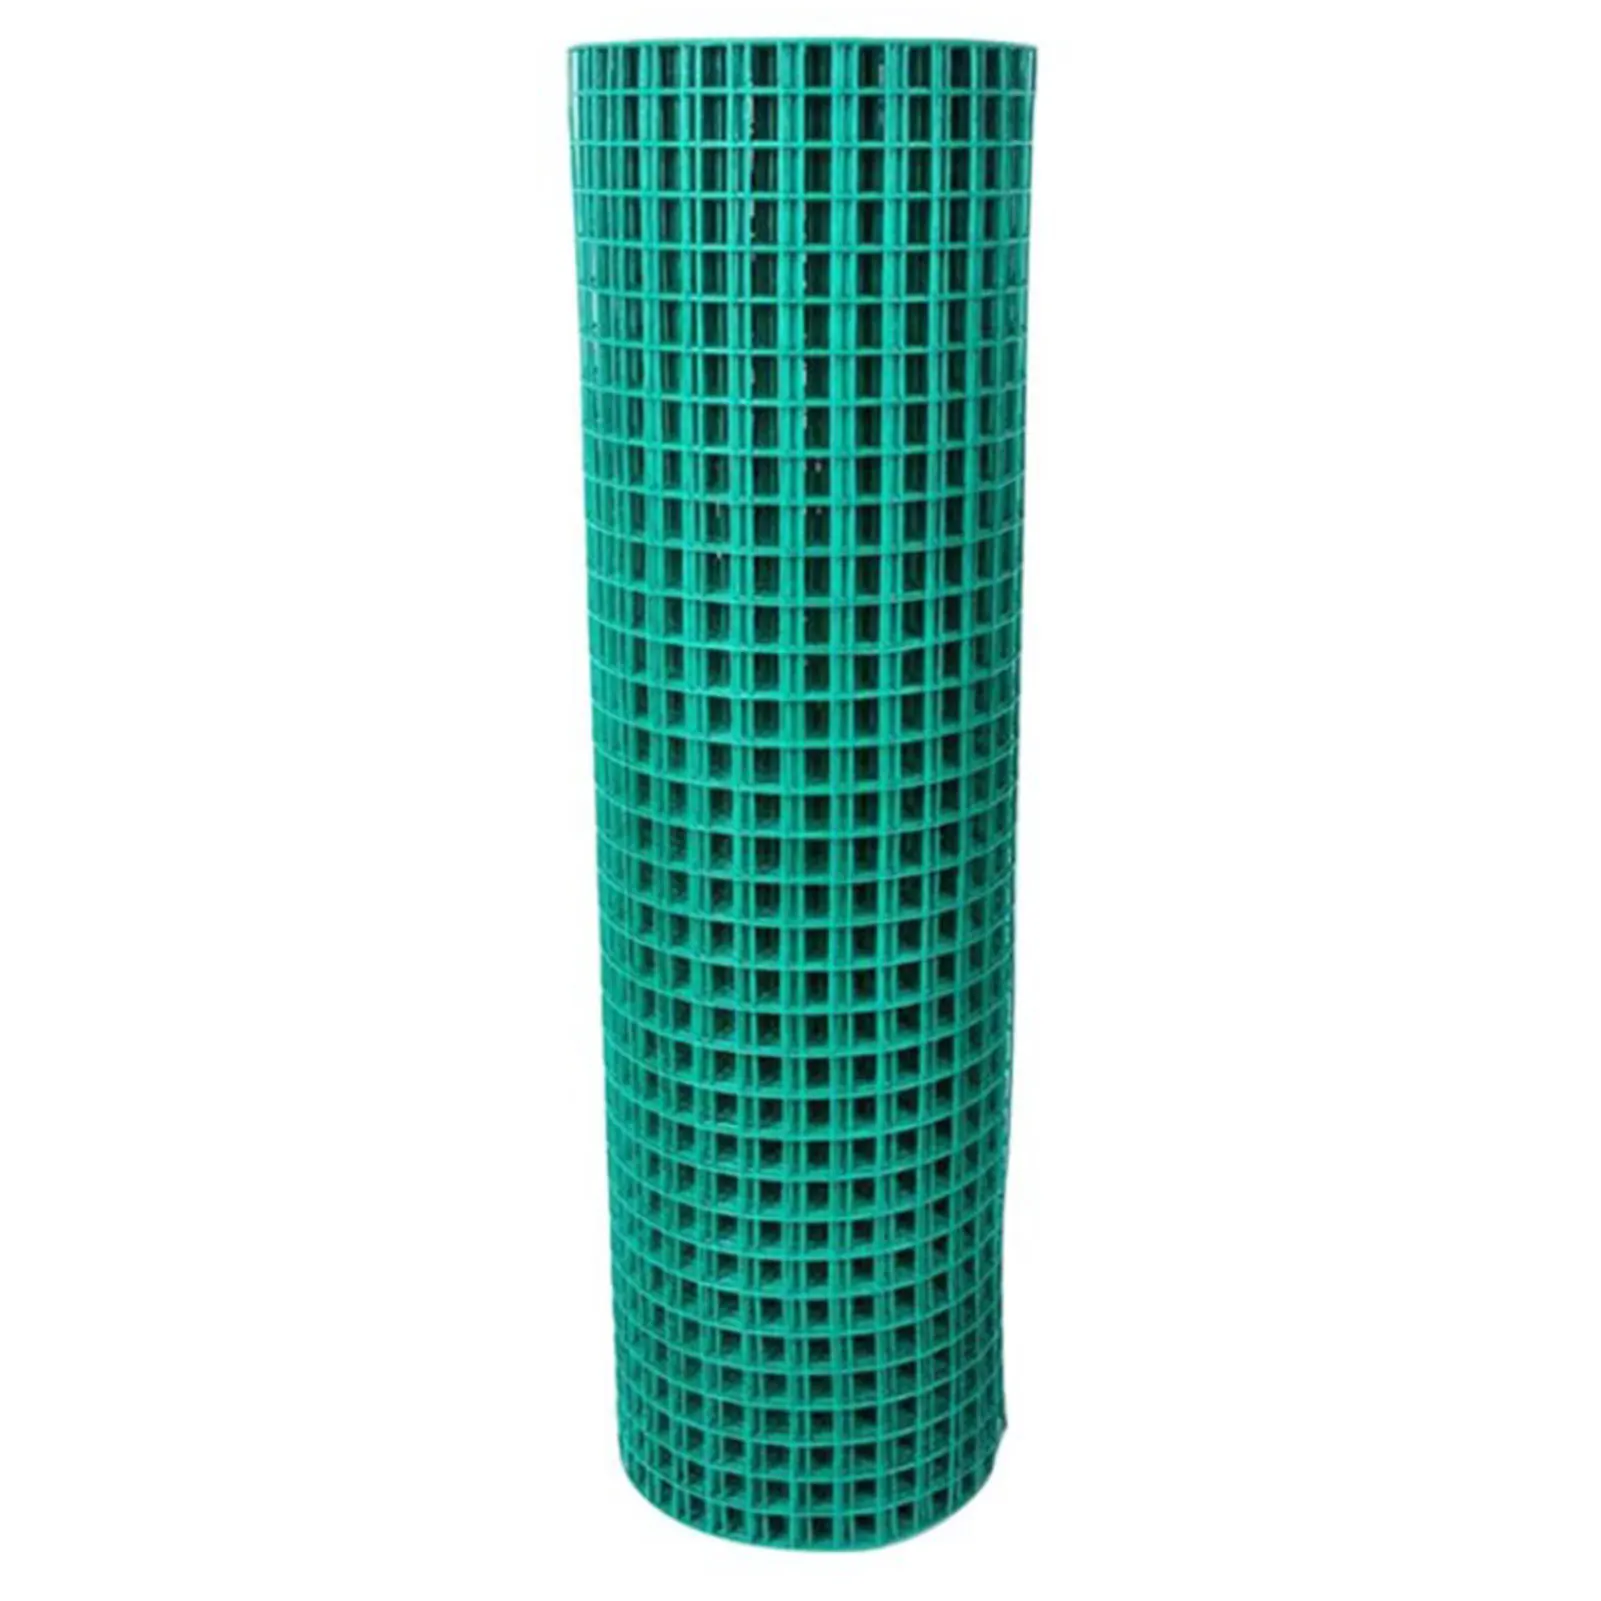 Safety Fence Green Plastic Mesh For Gardening Net Fence Sheet Protect Plants